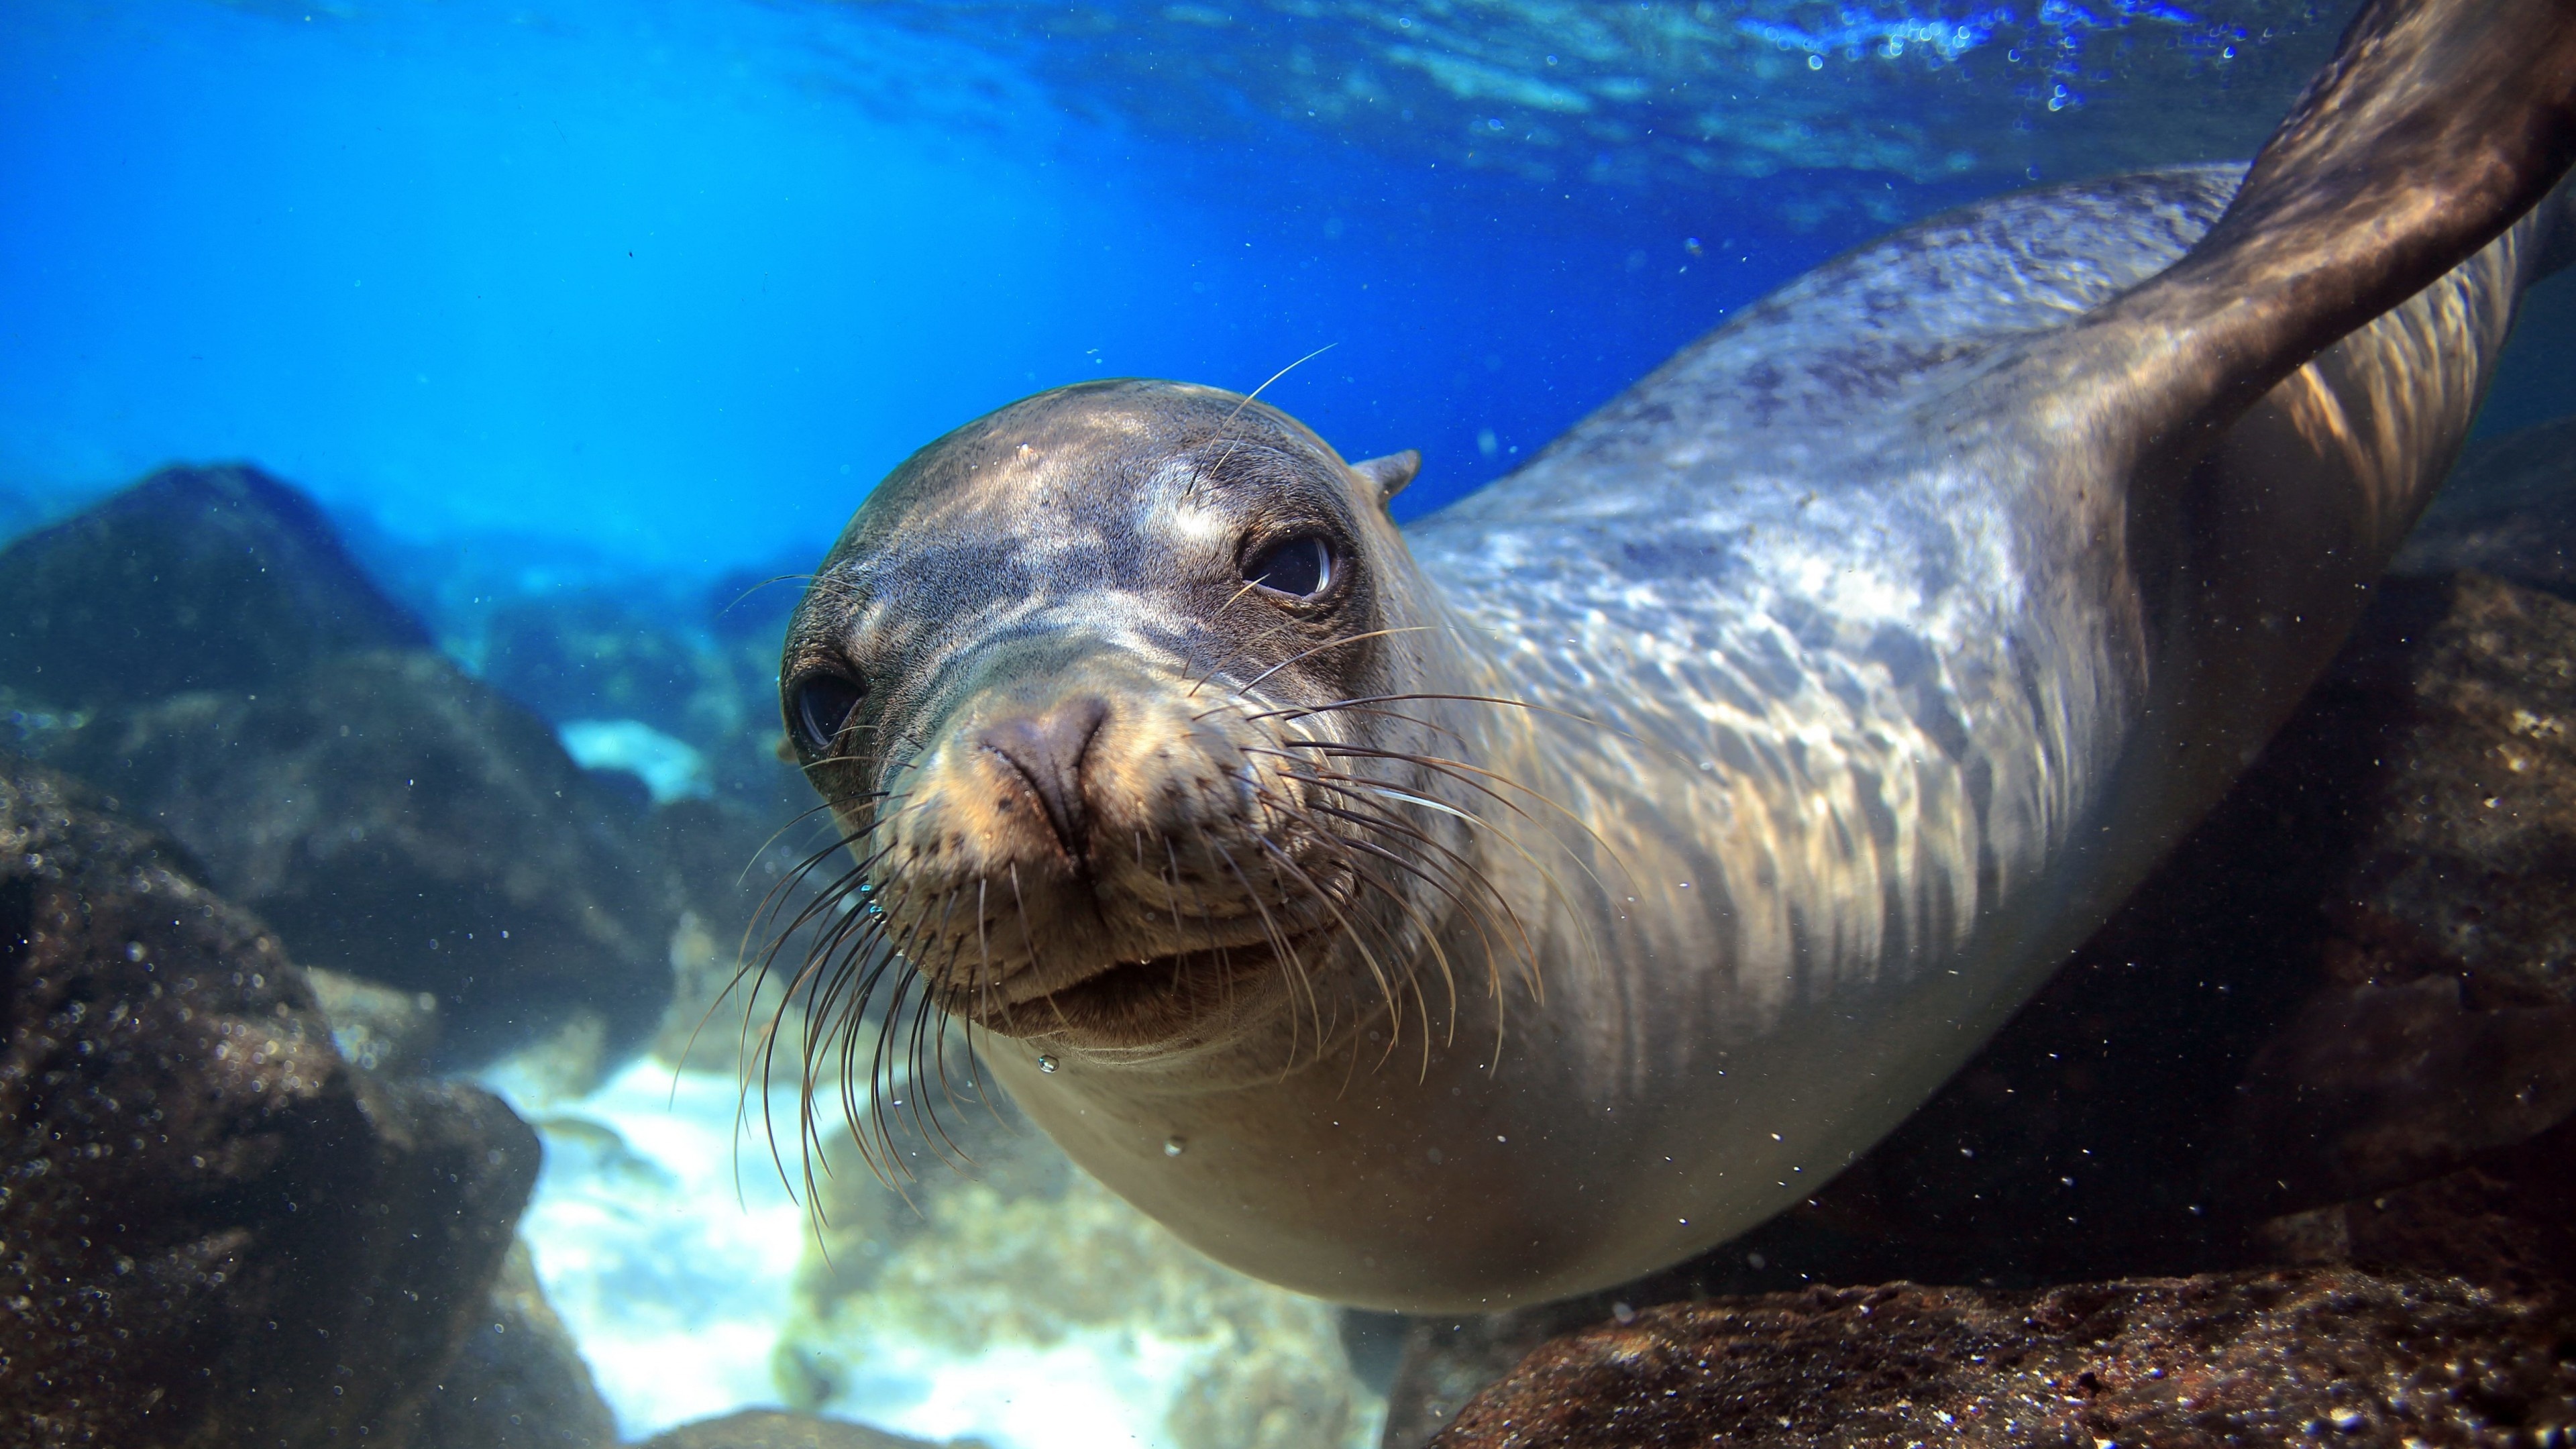 Ecuador: Sea Lion, Galapagos Islands, Underwater, Close-up, Diving, Tourism, Bottom, World's best diving sites. 3840x2160 4K Background.